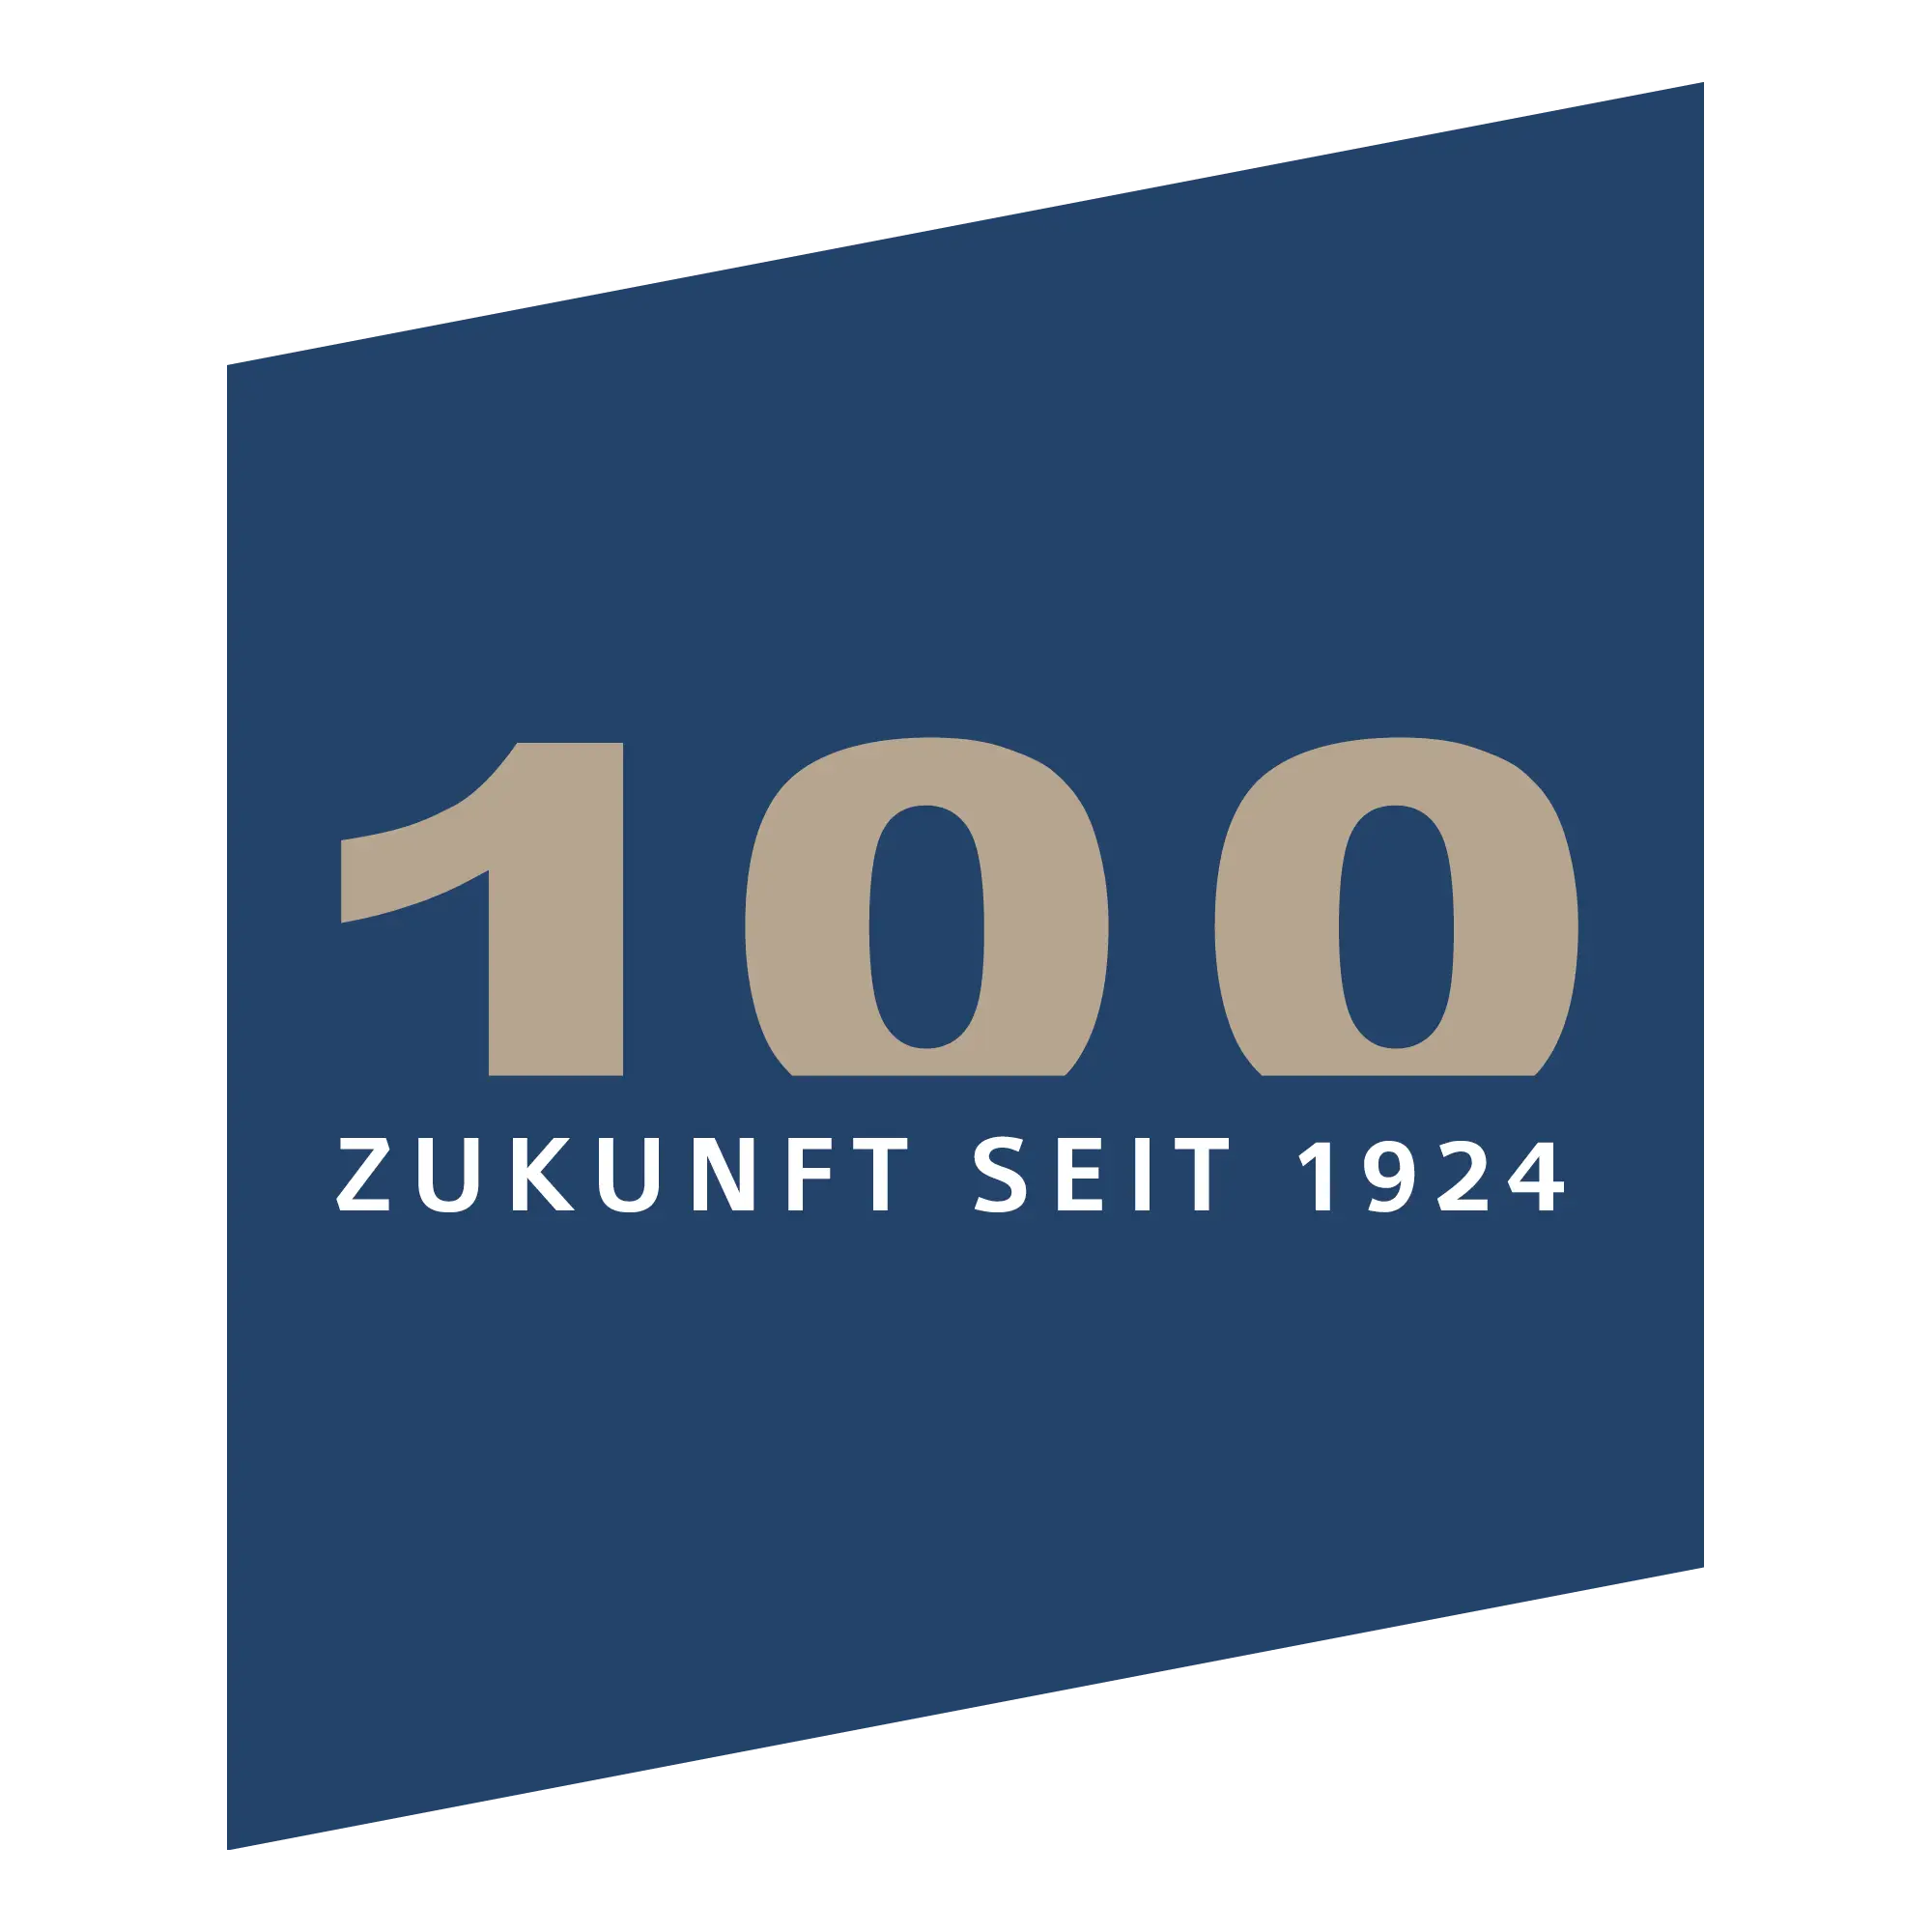 A darkblue parallelogram displaying a golden „100" with a white sublime saying „ZUKUNFT SEIT 1924".